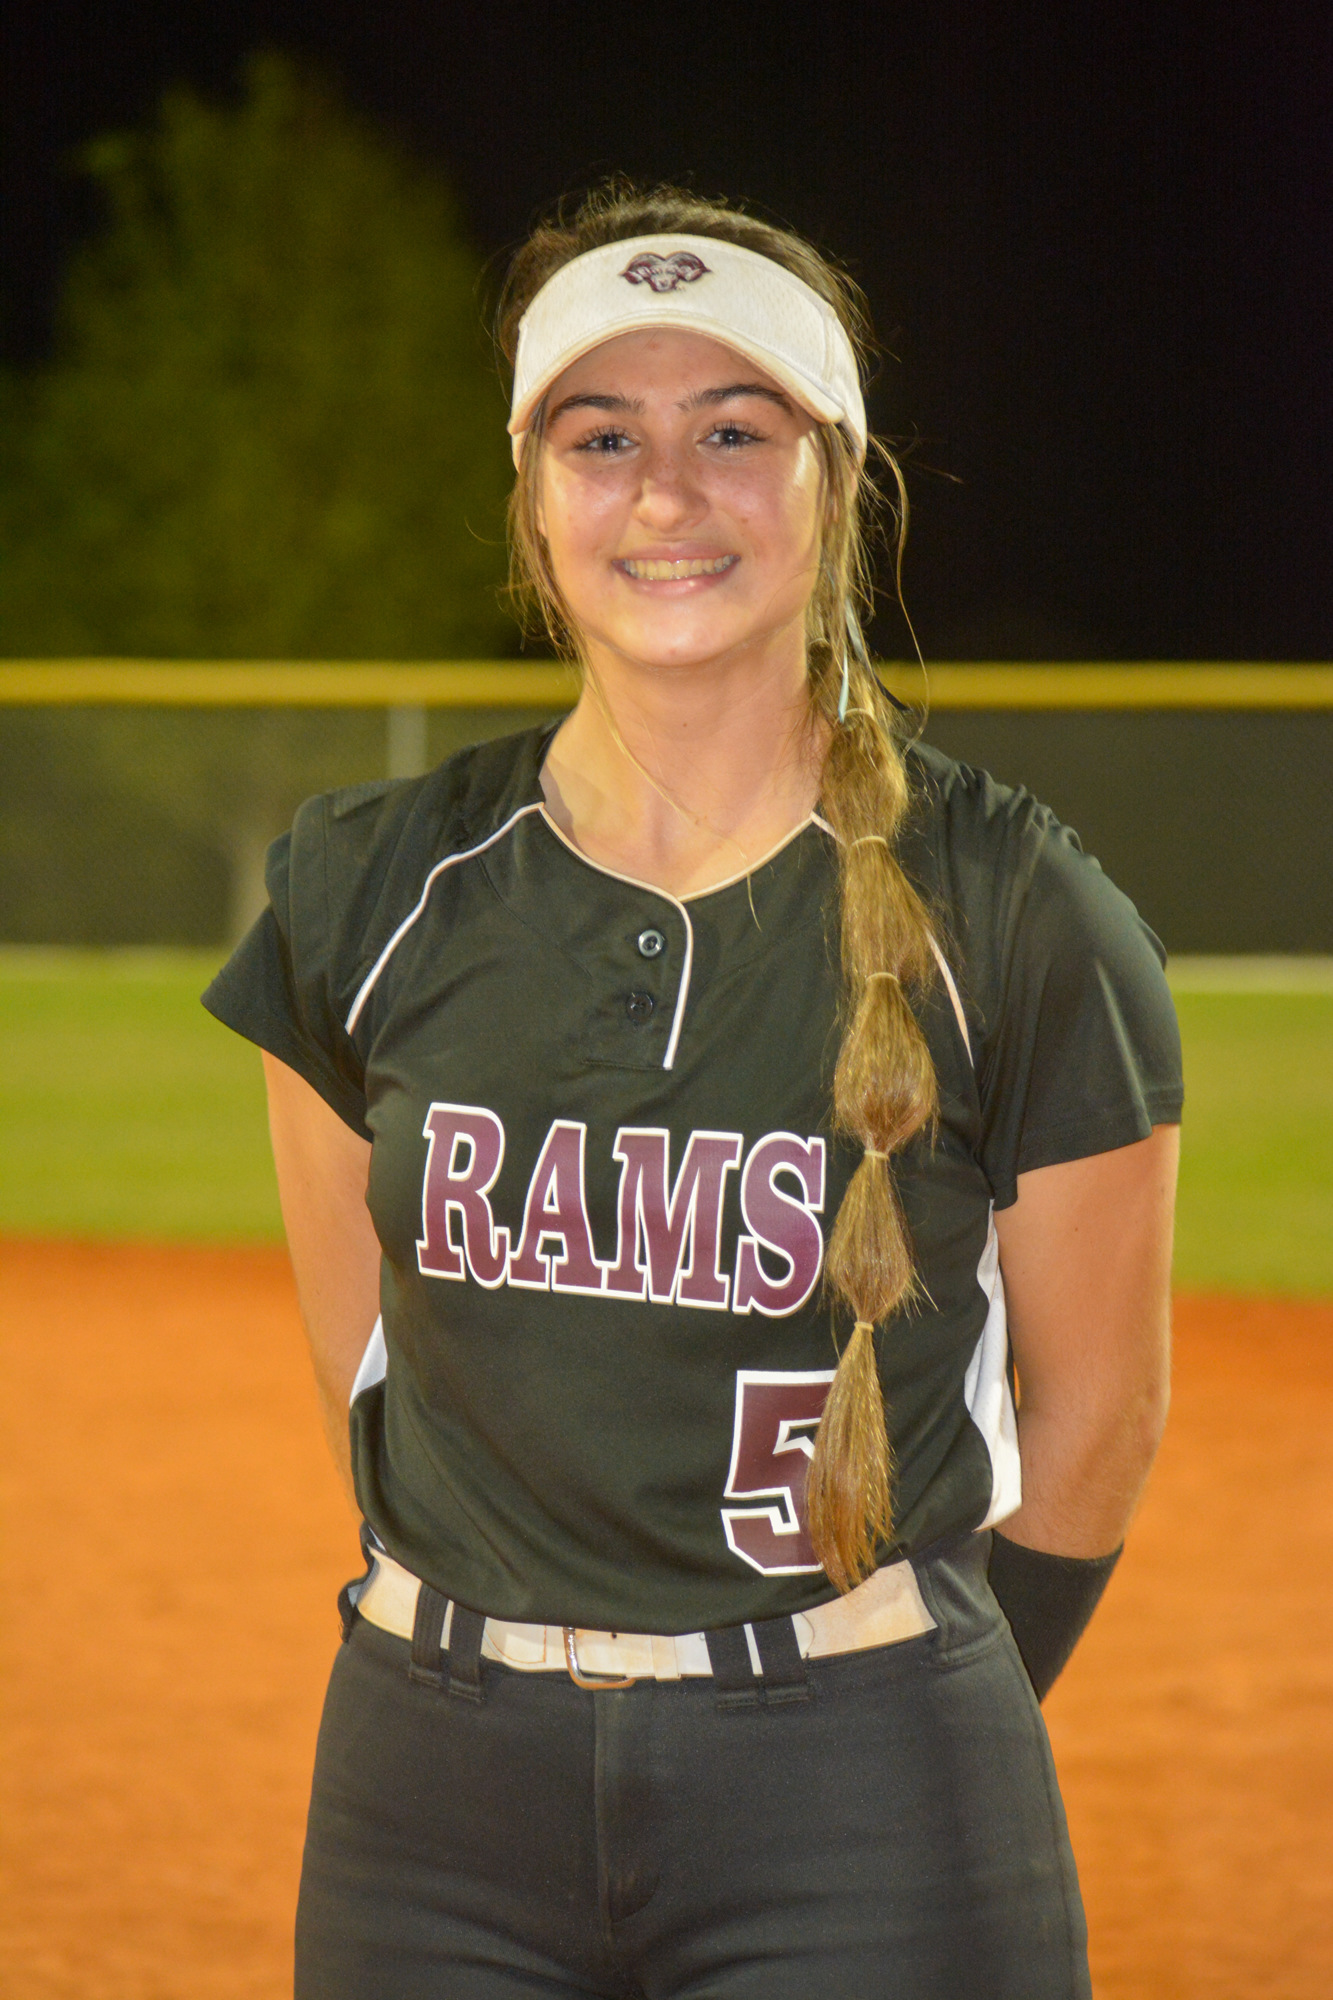 7. Riverview senior softball player Michelle DiPuma signed with Central Florida in November.